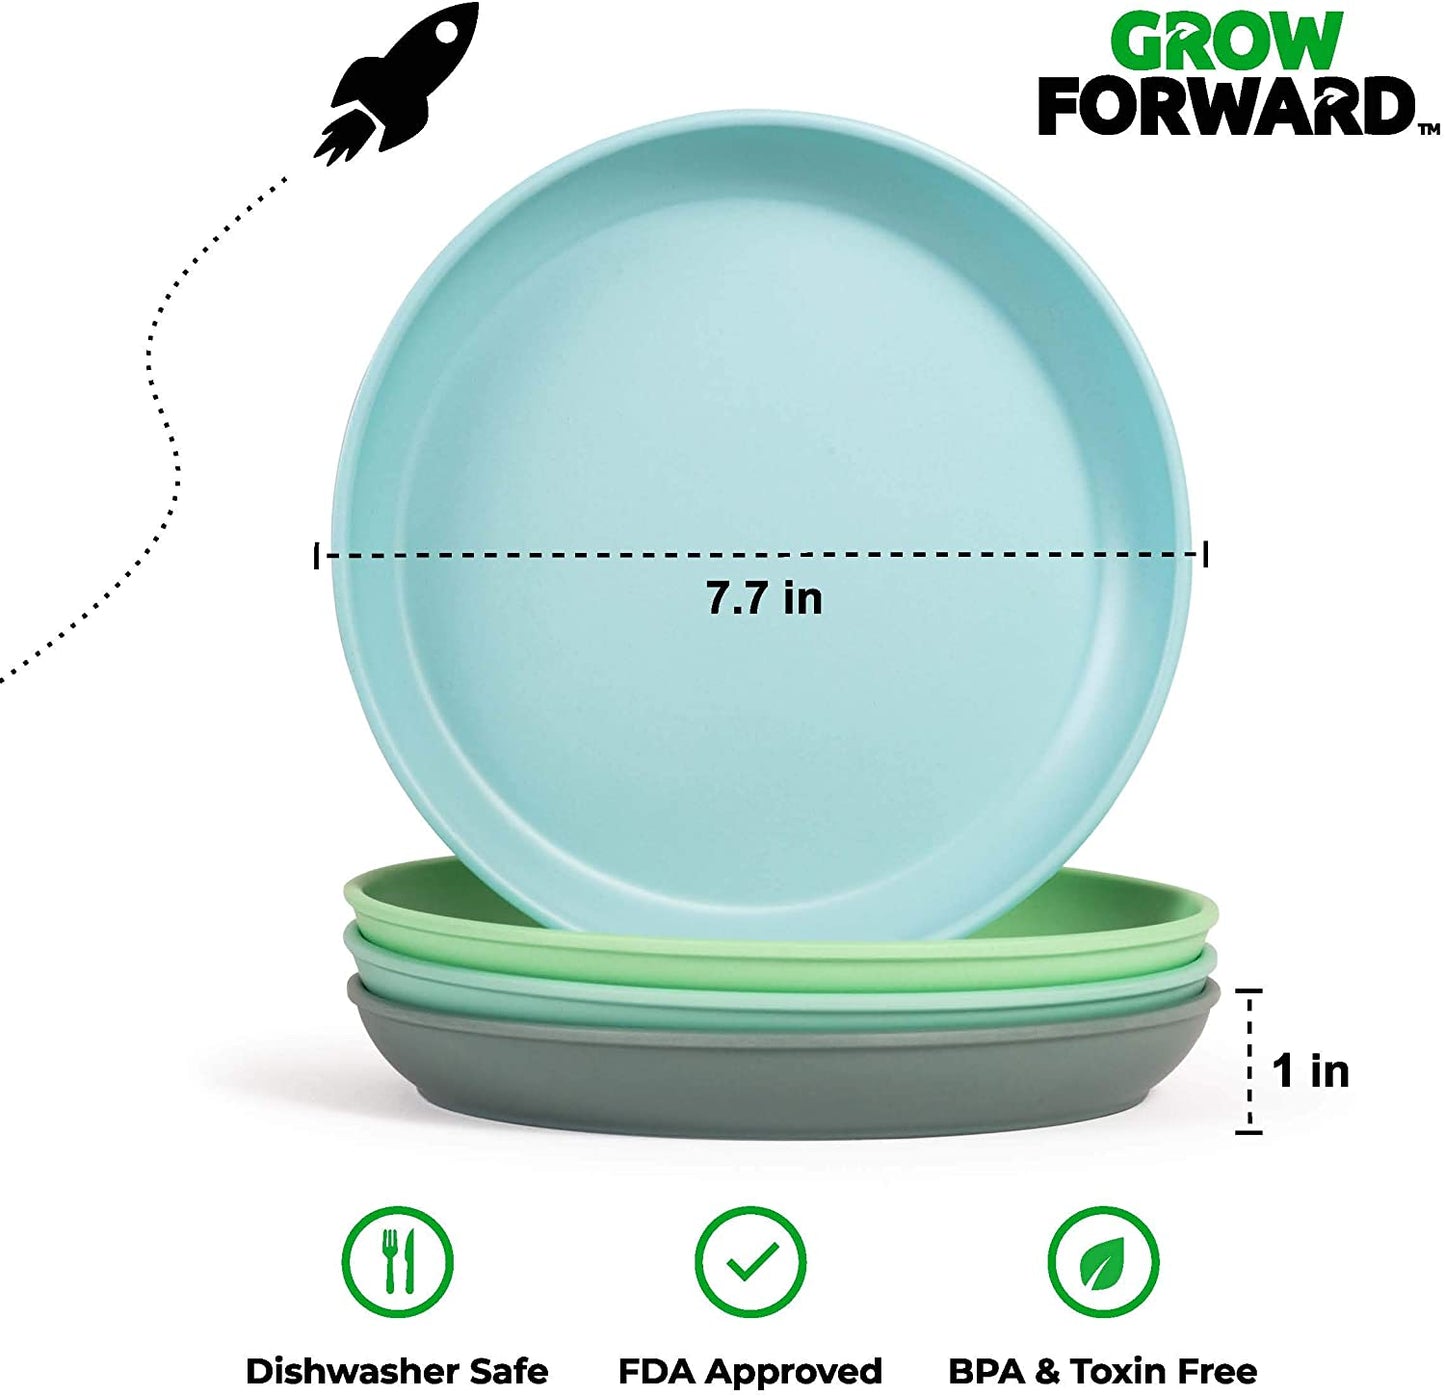 Bamboo Kids Plates and Bowls Set - 4 Bamboo Plates for Kids and 4 Bamboo Bowls for Kids - BPA Free & Dishwasher Safe - Eco Friendly and Reusable Childrens Dishes - Rainforest